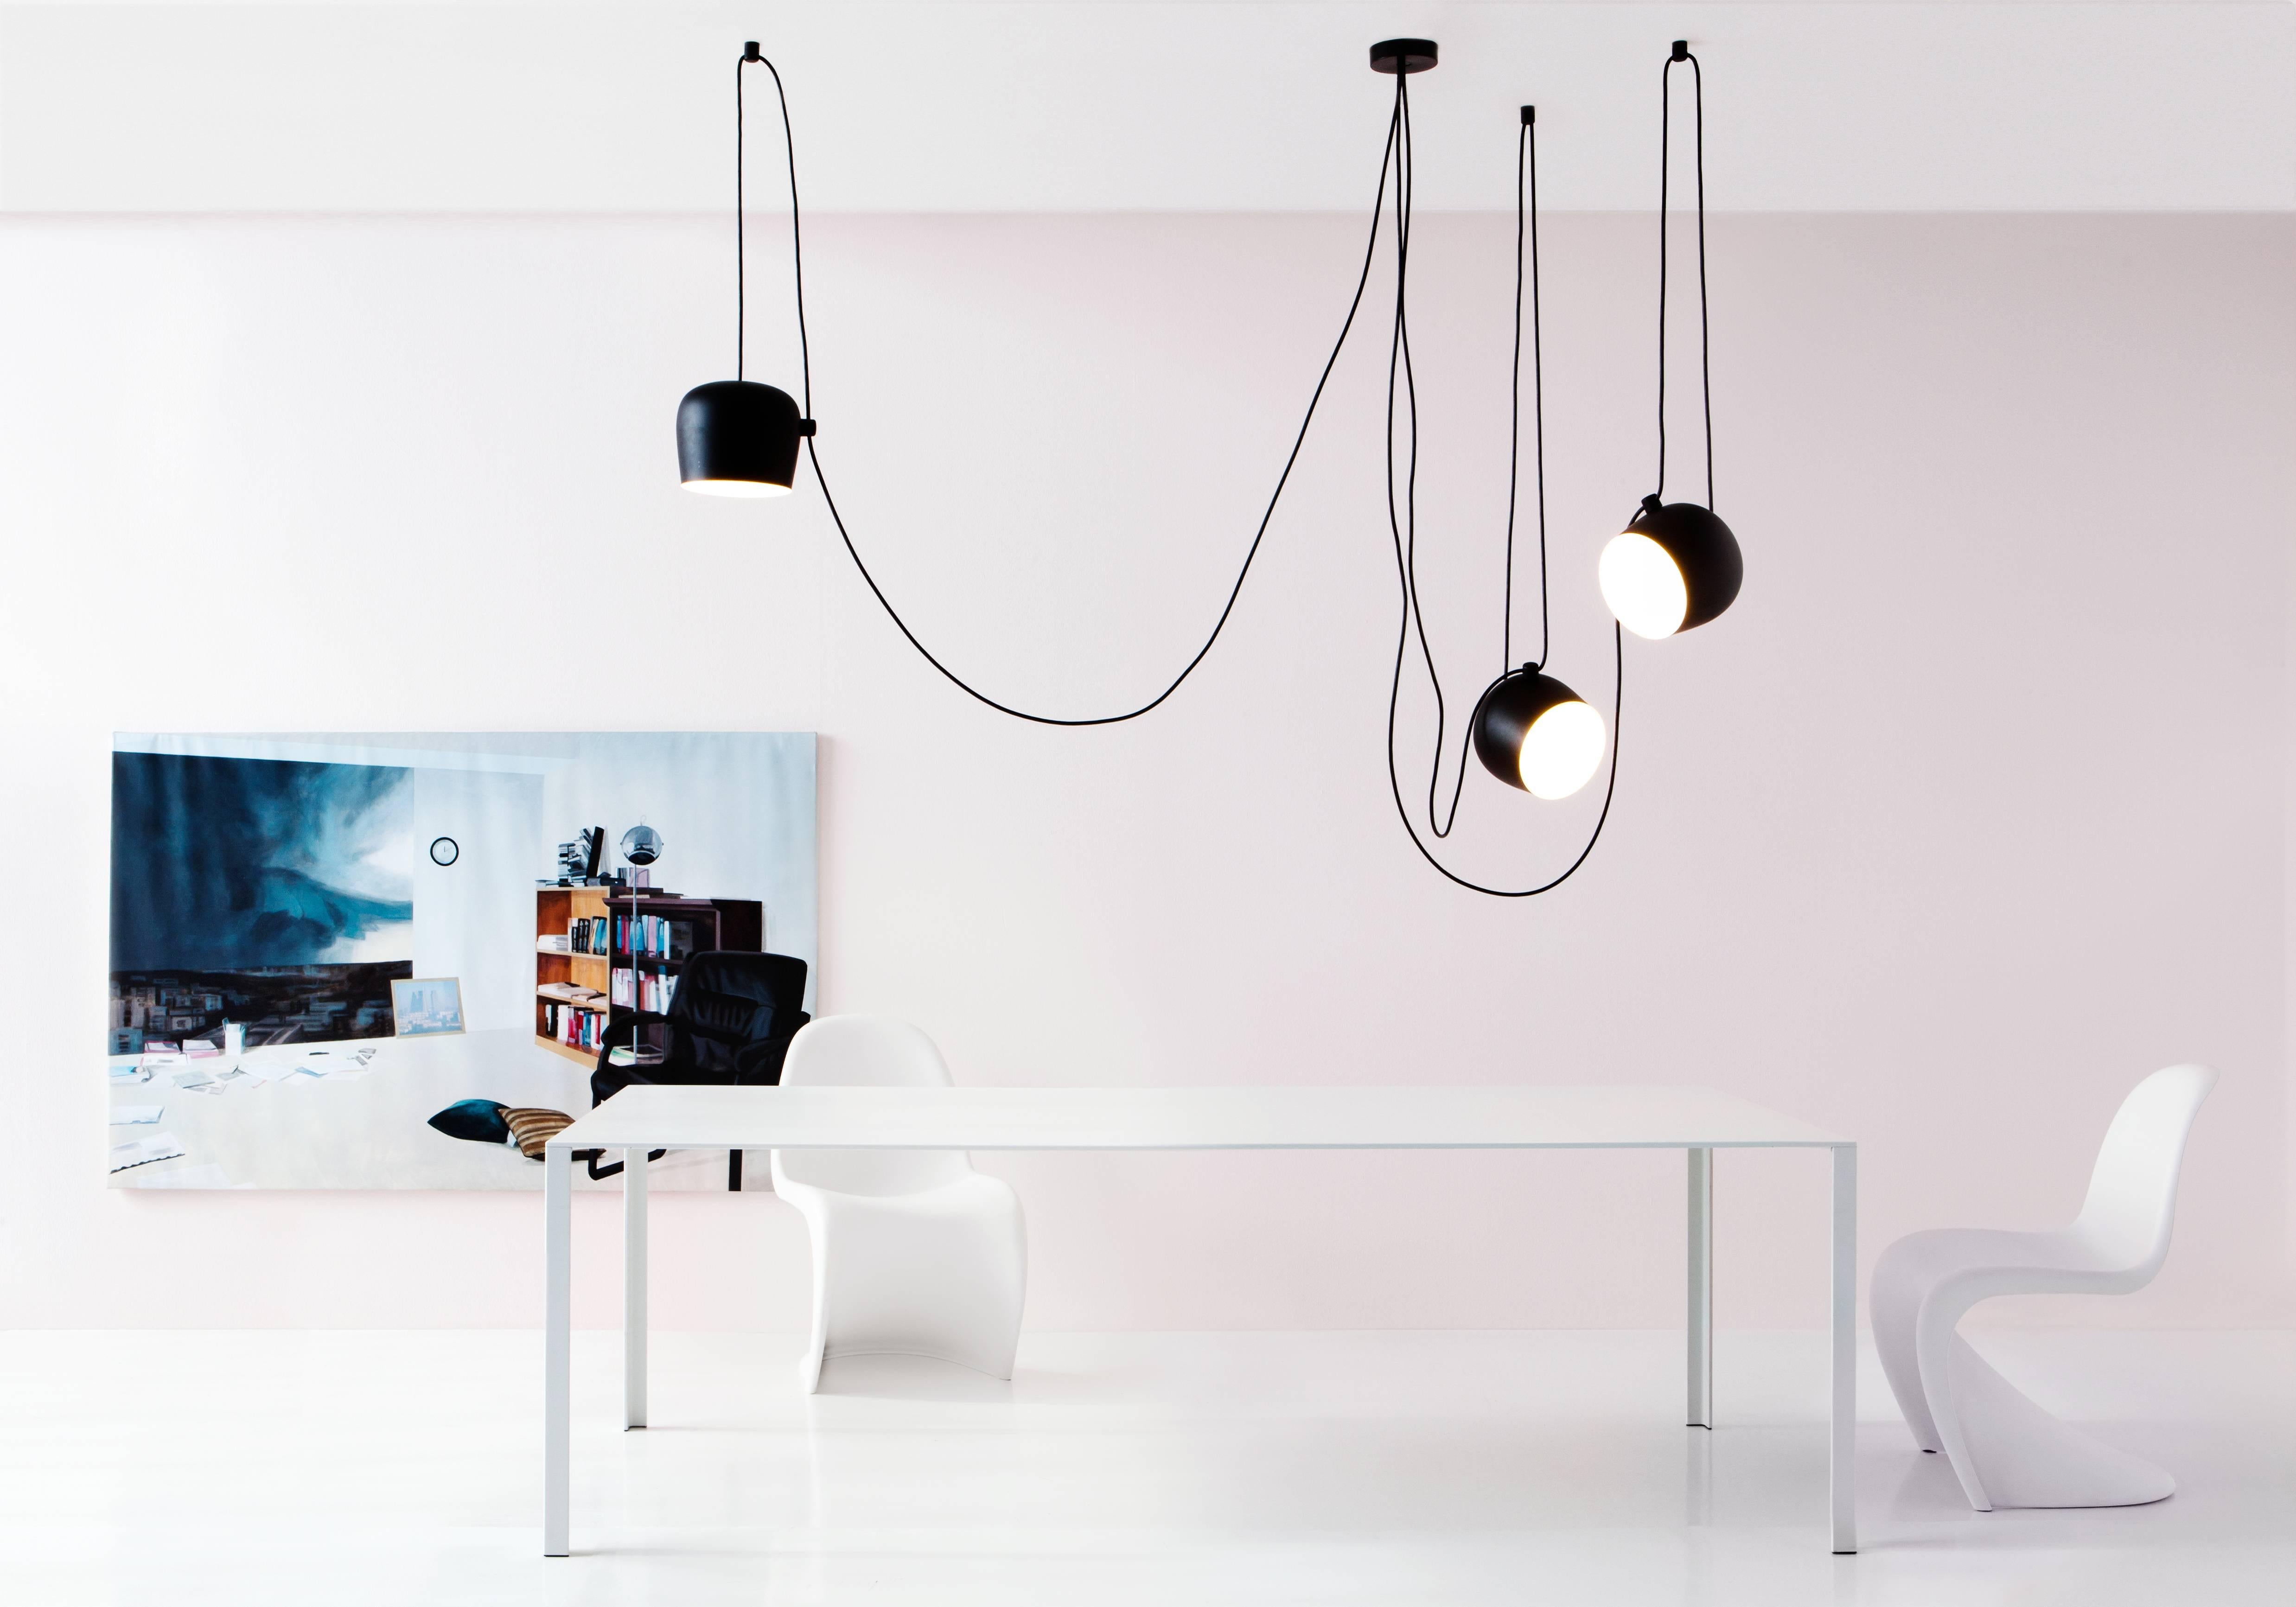 FLOS Aim Black Three-Lamp Light Set w/ Canopy by Ronan & Erwan Bouroullec

Created by the Bouroullec brothers in 2010, the AIM ceiling light is a design stripped to its most basic—and beautiful—essence. This innovative form of modern pendant